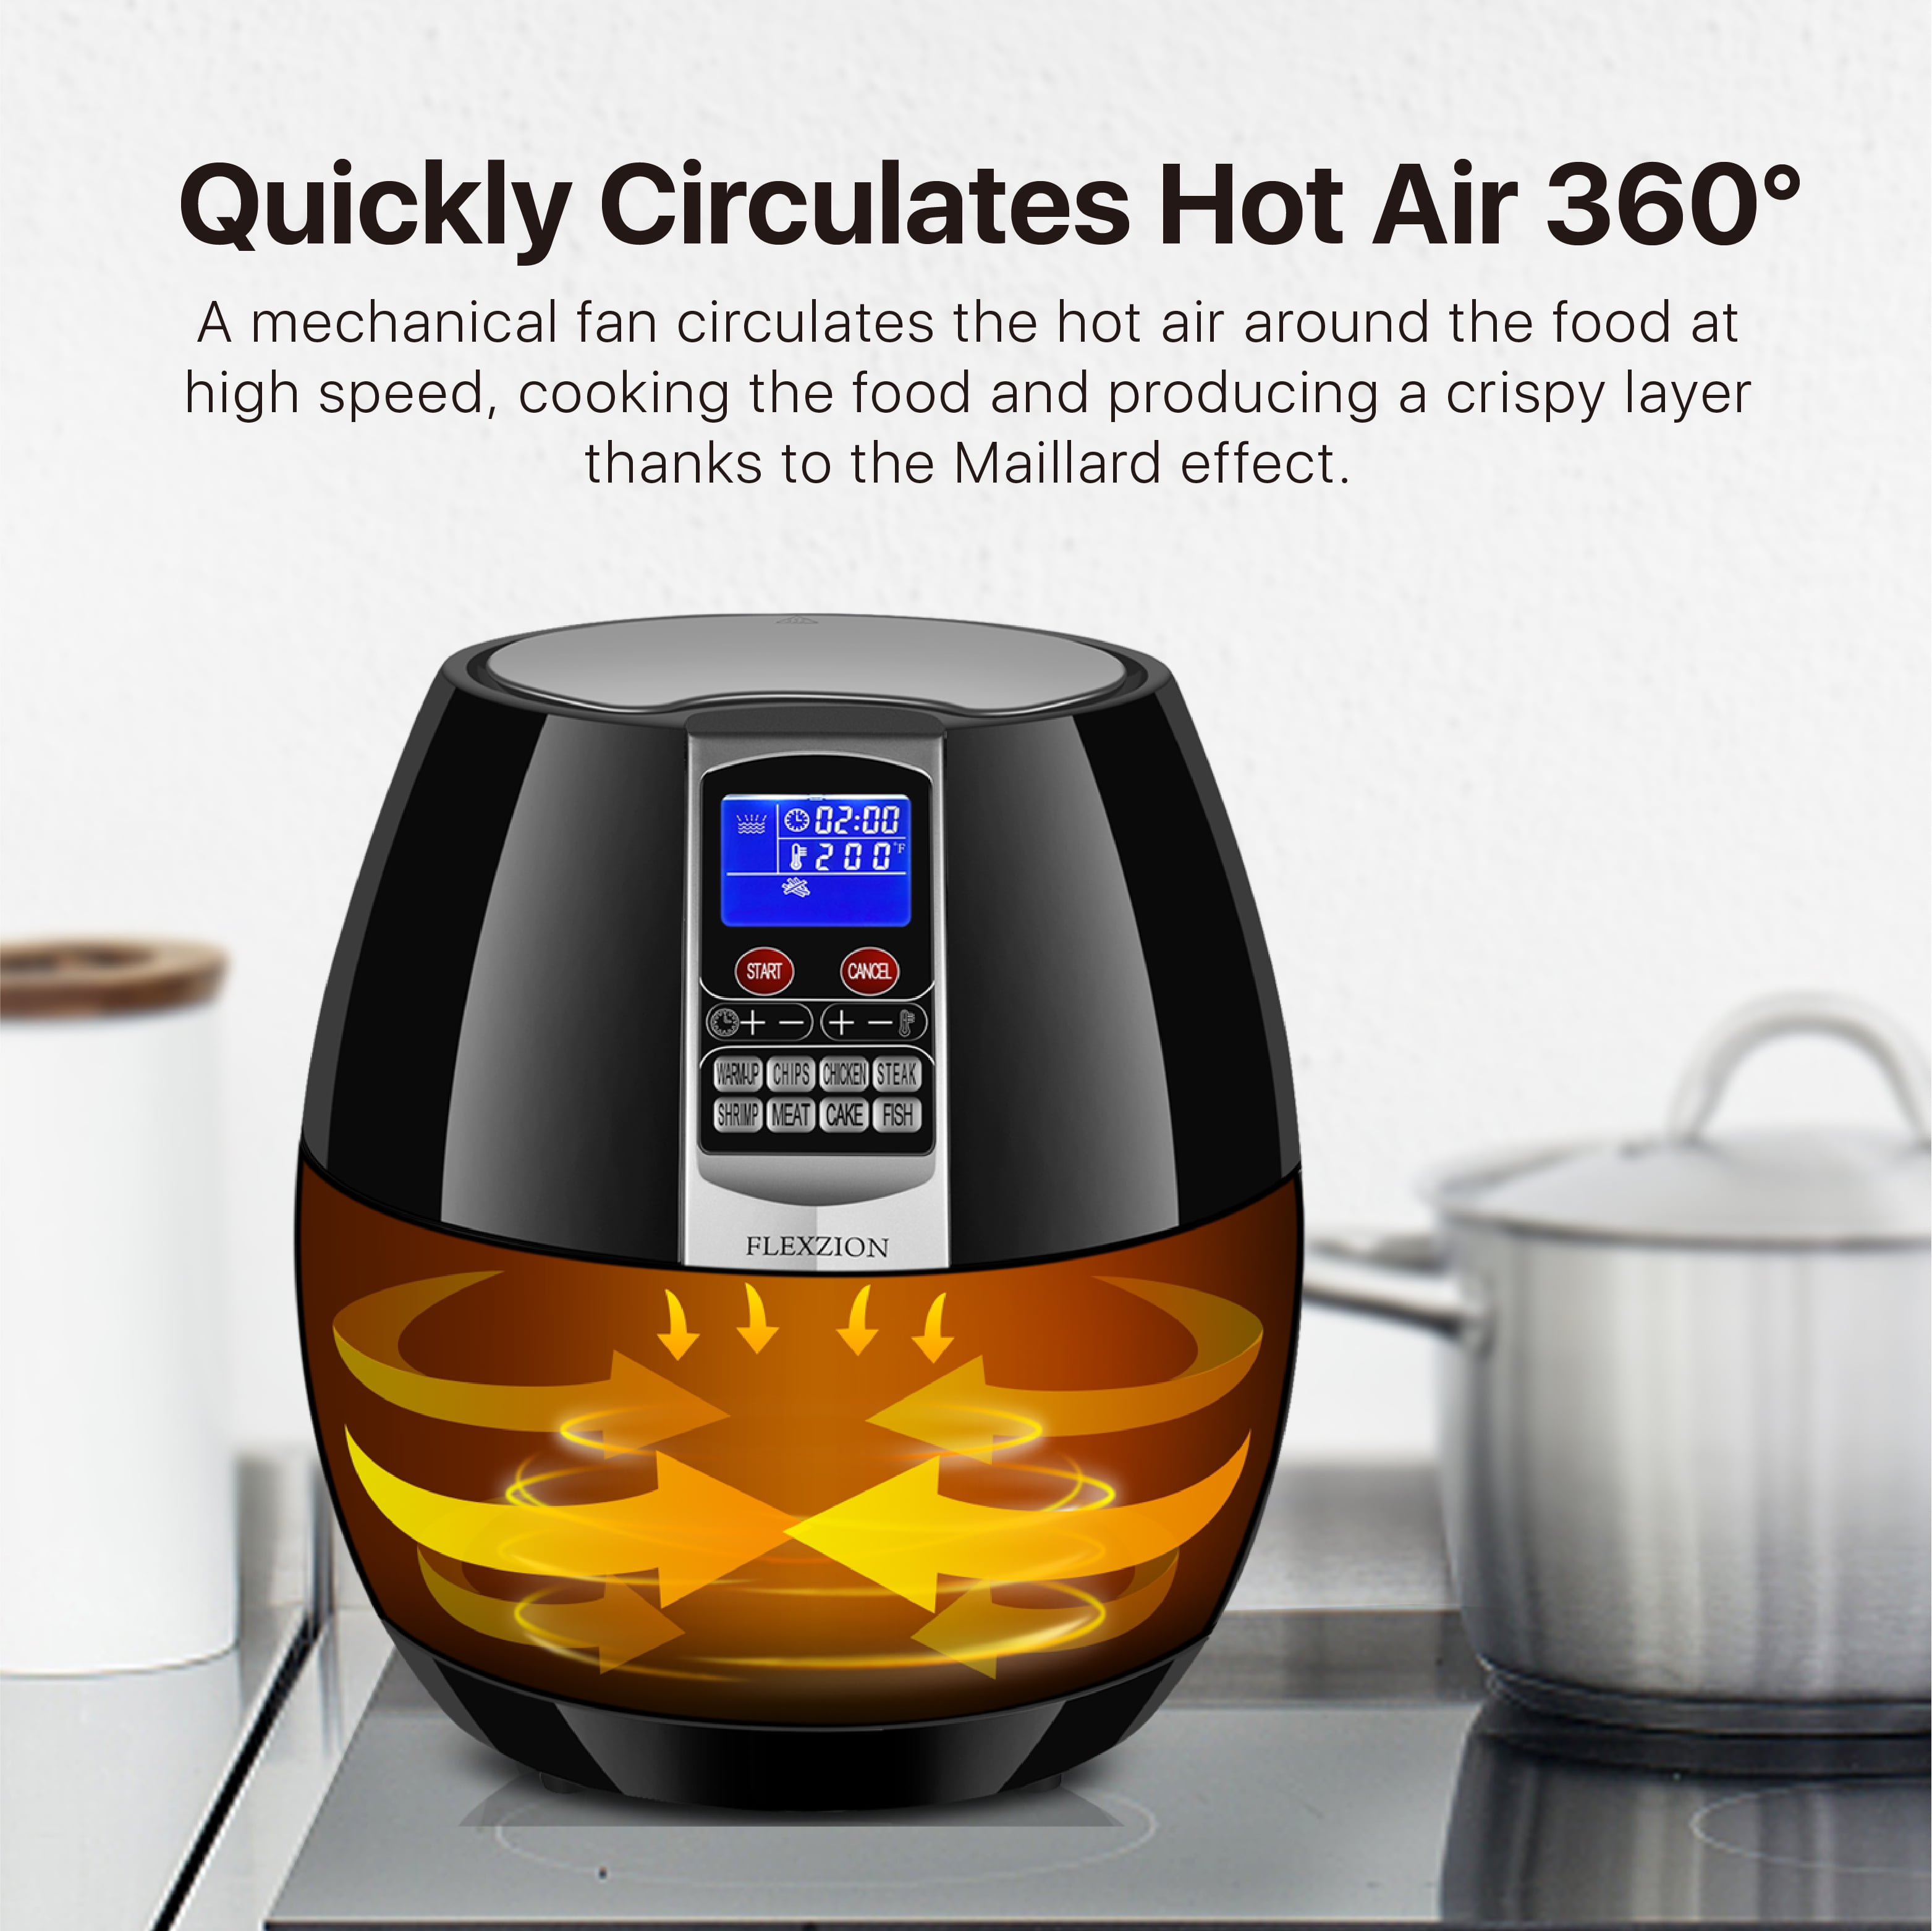 New House Kitchen Digital 3.5 Liter Air Fryer w/ Flat Basket, Touch Screen  AirFryer, Non-Stick Dishwasher-Safe Basket, Use Less Oil For Fast Healthier  Food, 60 …